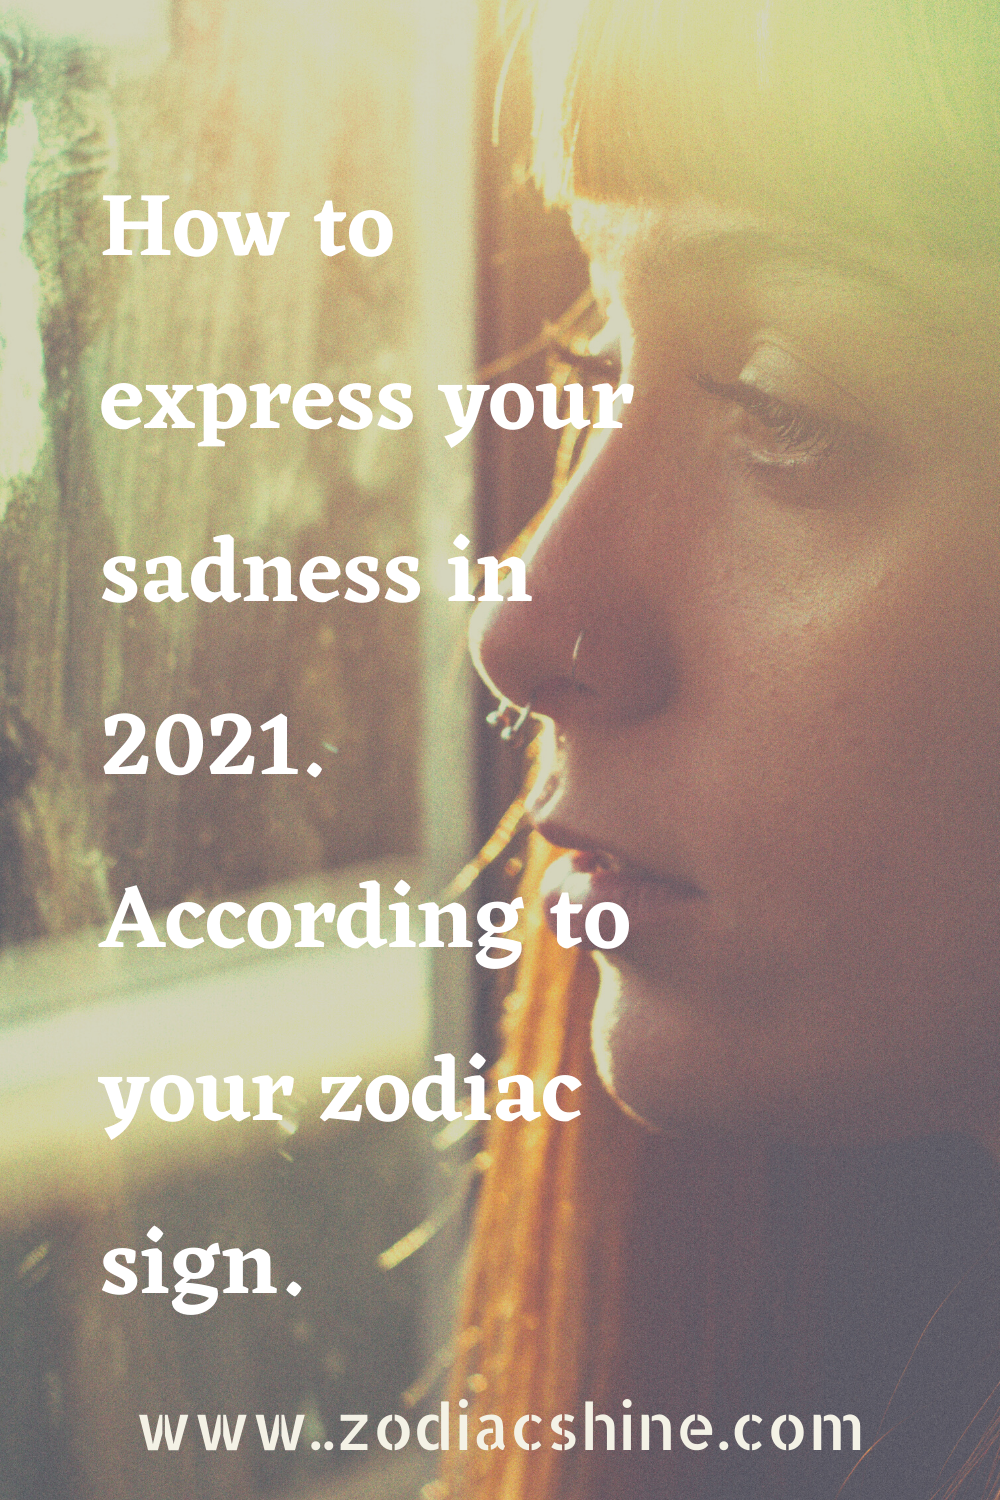 How to express your sadness in 2021. According to your zodiac sign.